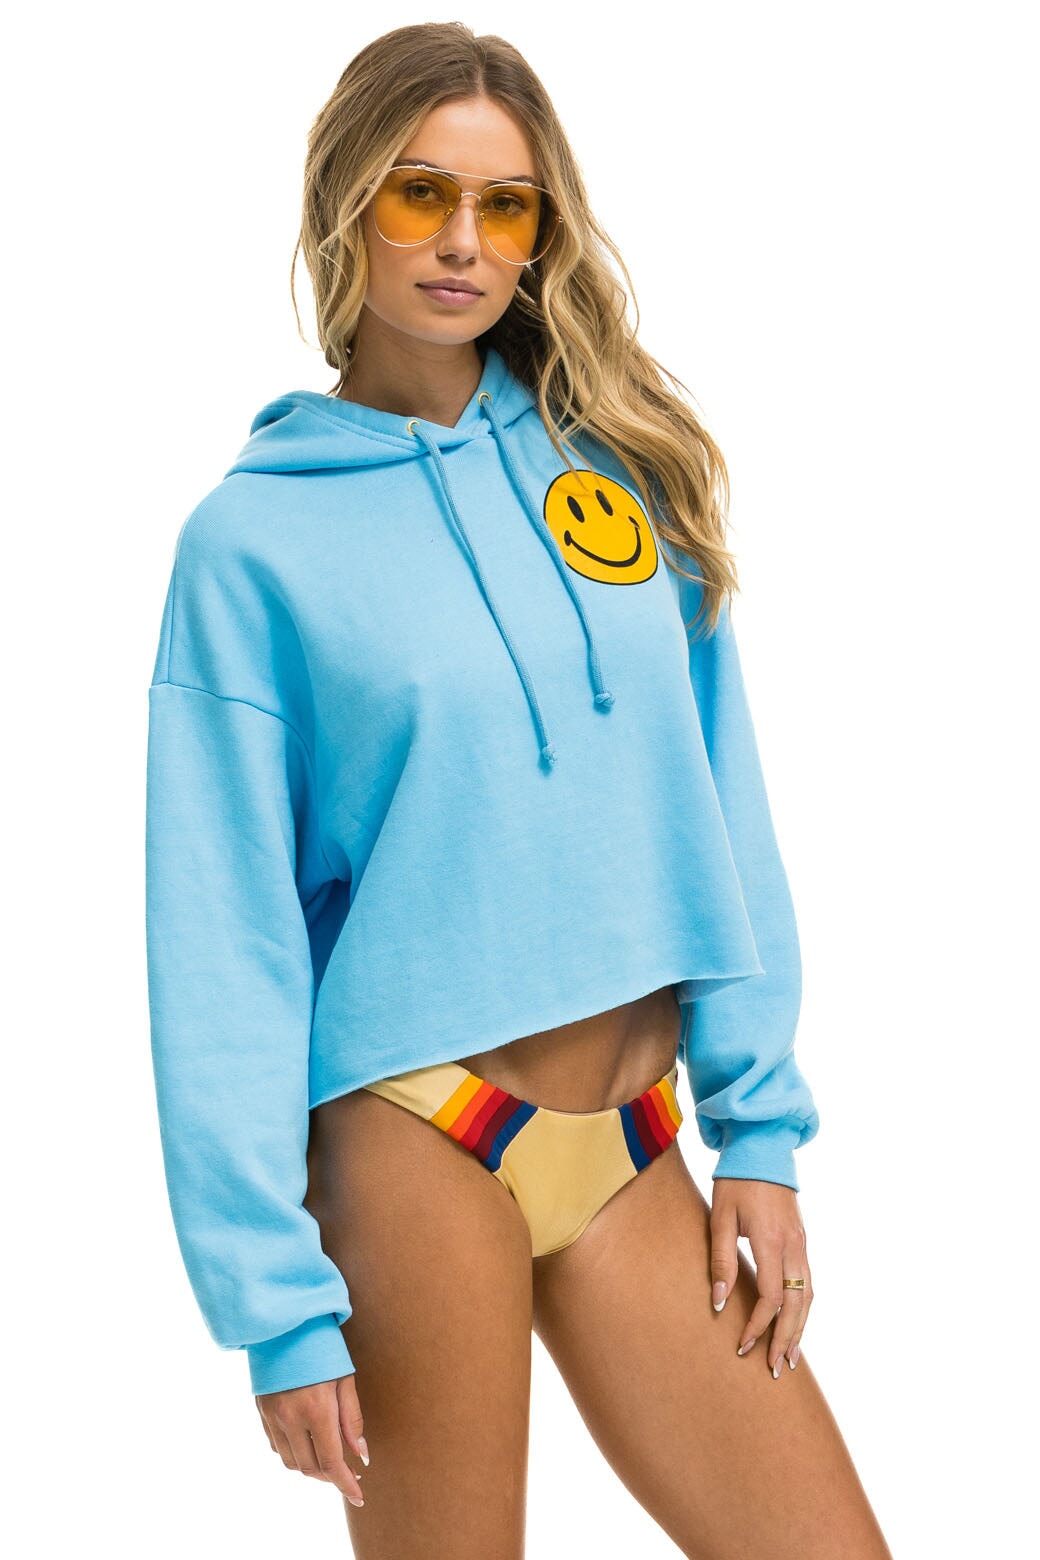 SMILEY 2 RELAXED CROPPED PULLOVER HOODIE - SKY Aviator Nation 